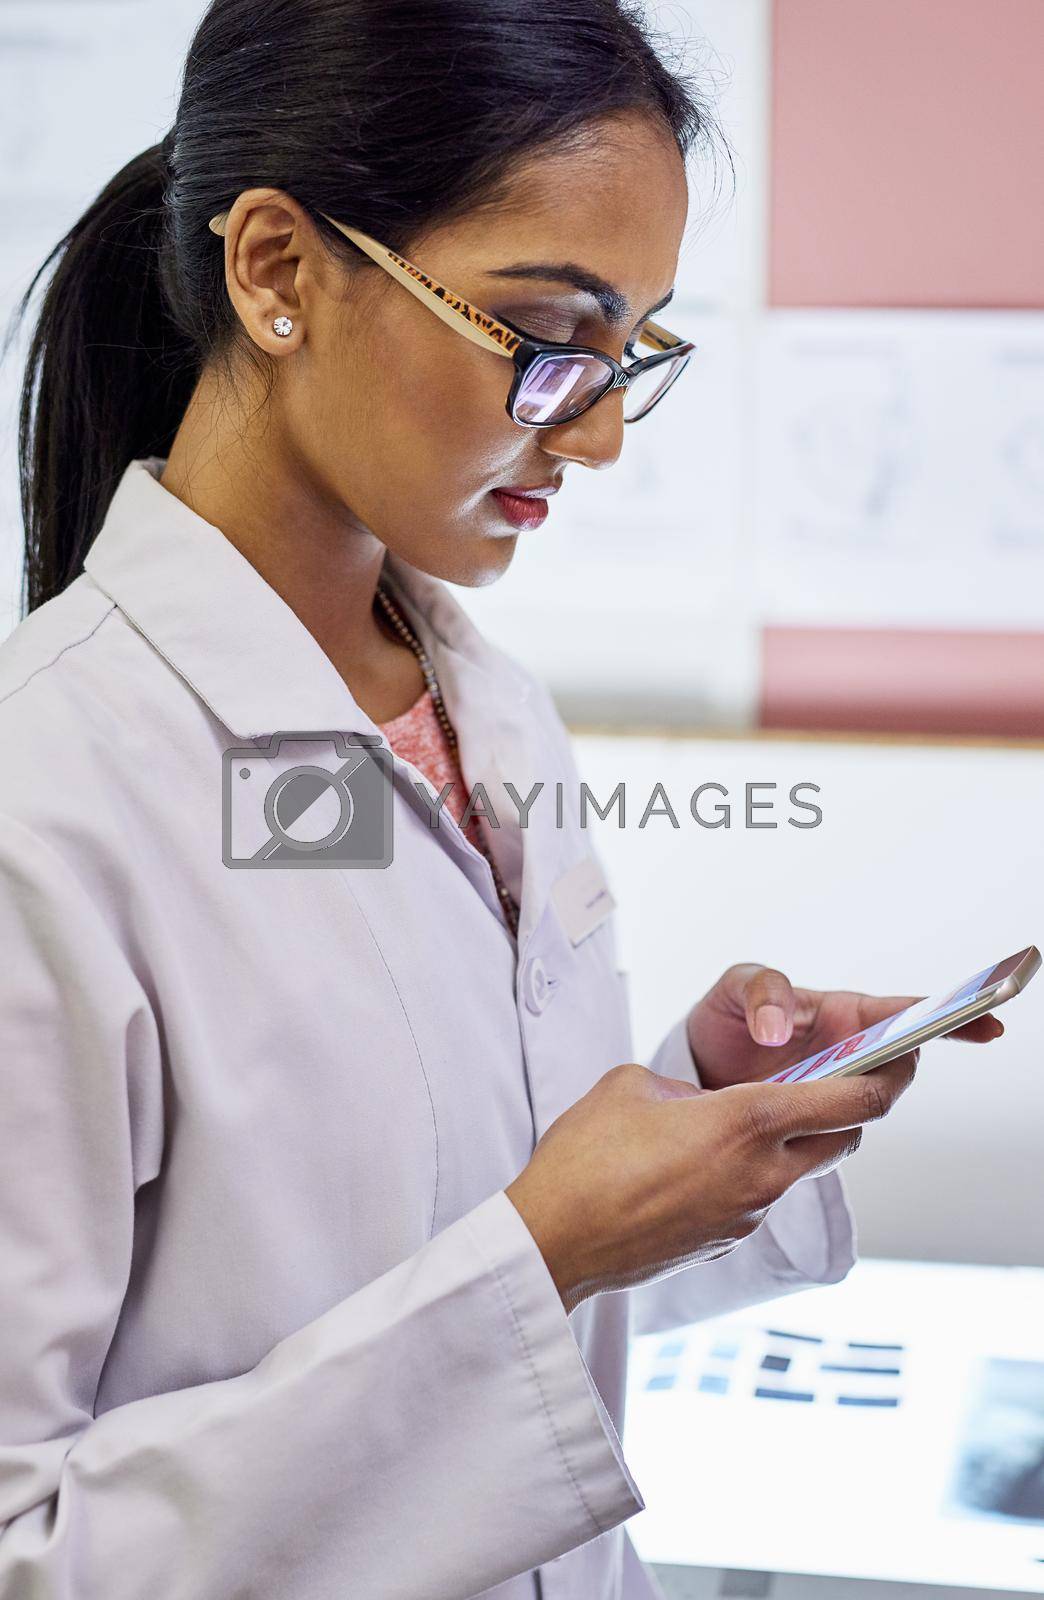 Cropped shot of a young female dentist texting on her cellphone in her office.